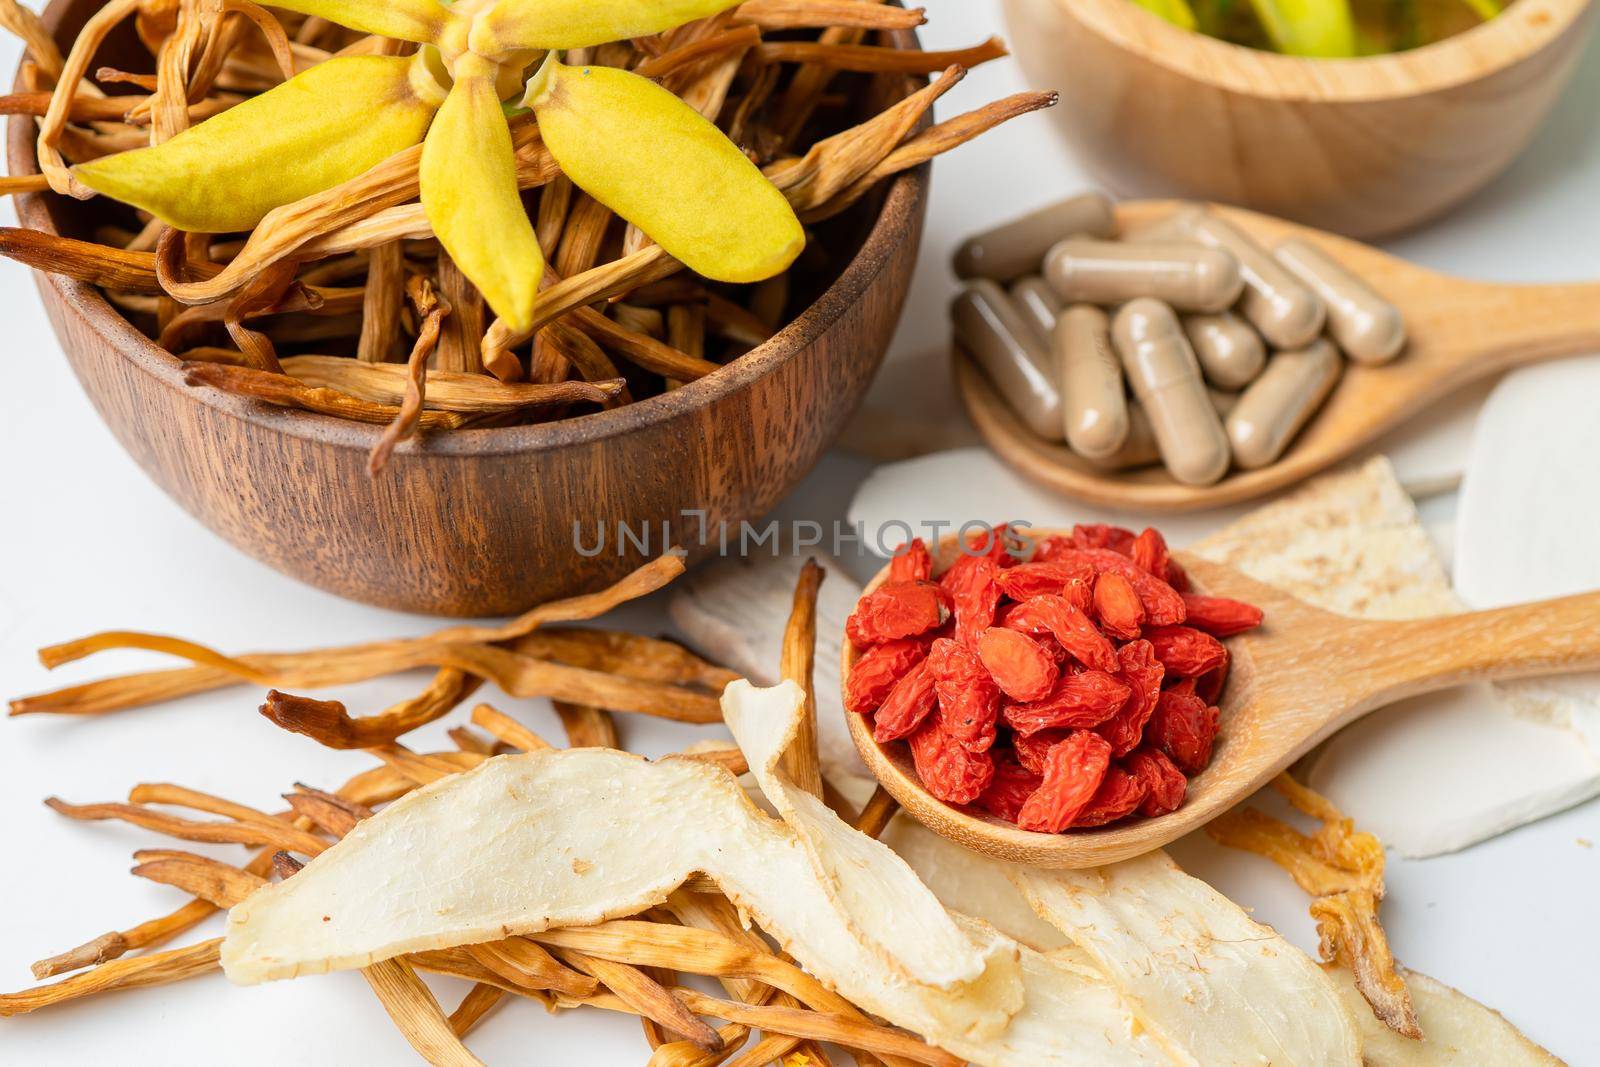 Chinese herb medicine with goji berries for good healthy. by pamai